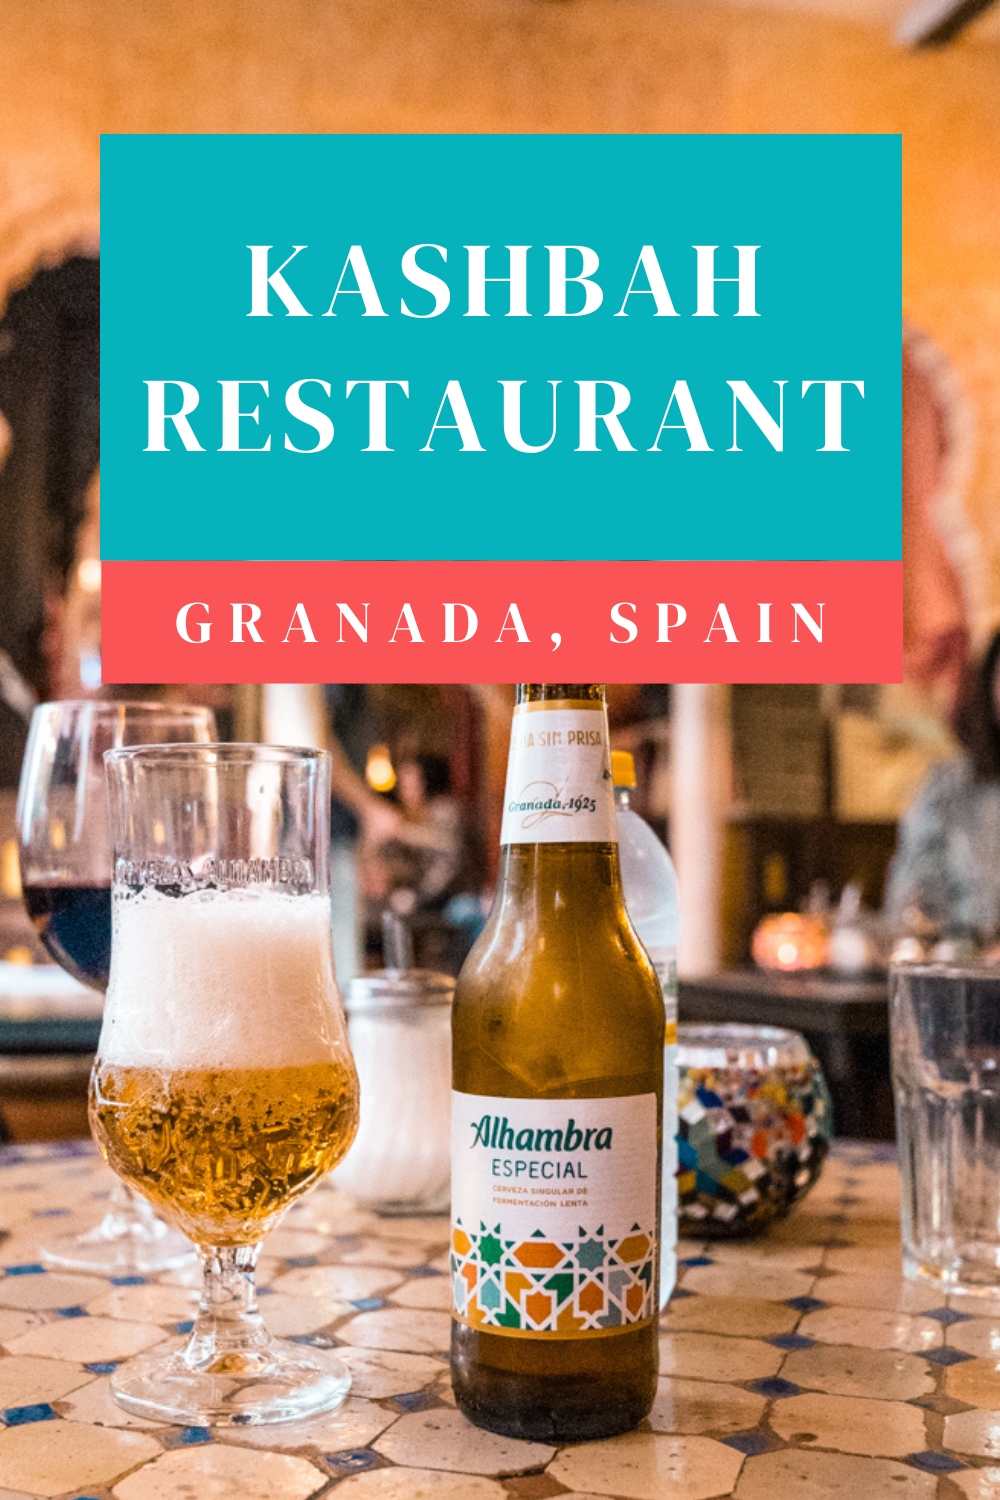 PIN image about Kashbah restaurant and teteria in Granada, Spain